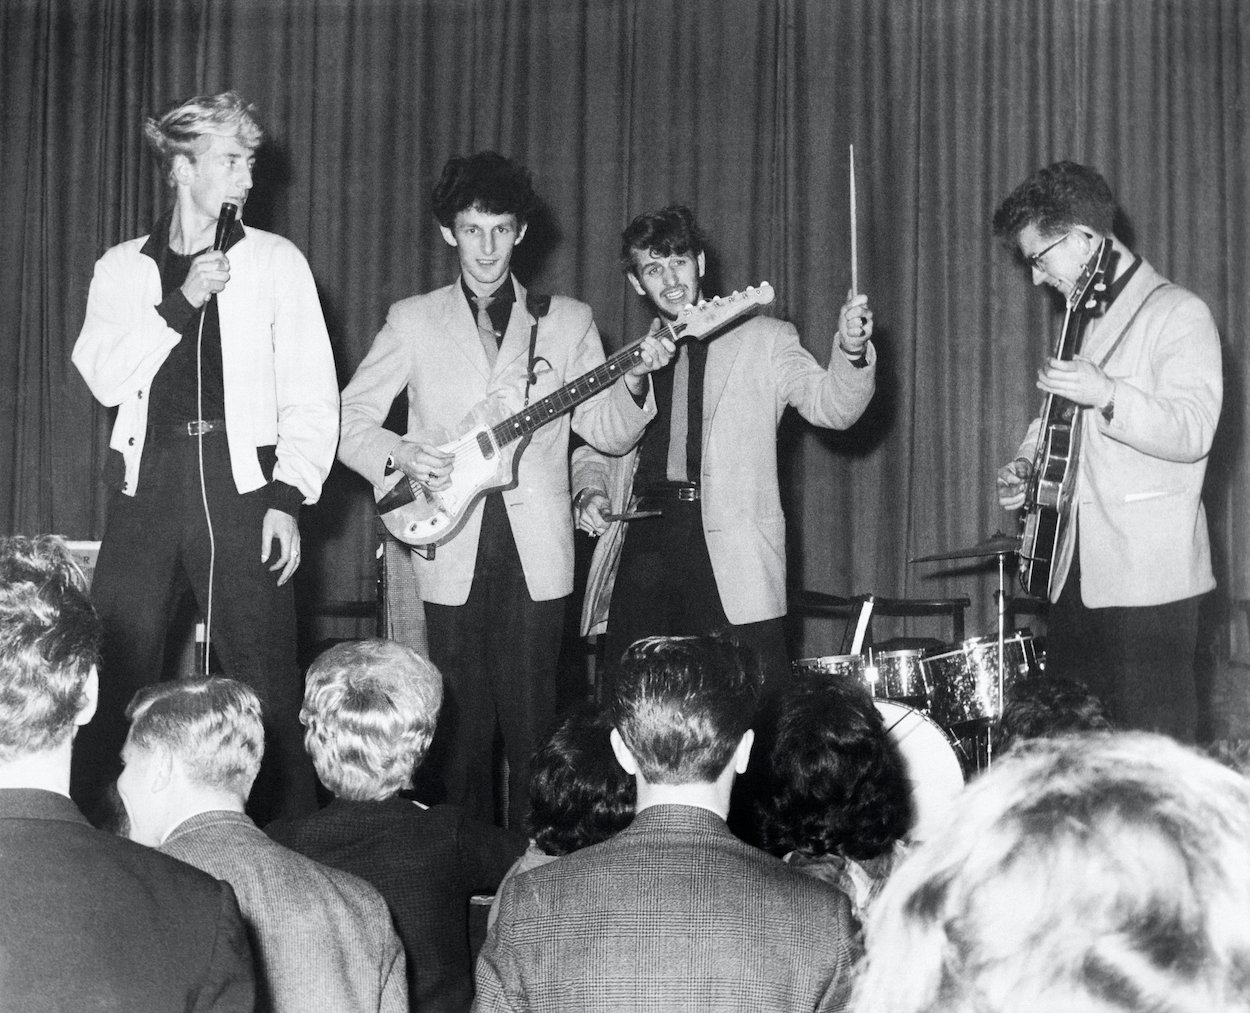 Ringo Starr (second from right) drums at a concert for Rory Storm and the Hurricanes, Ringo's first successful band, who got a German room upgrade thanks to their suits, in 1961.